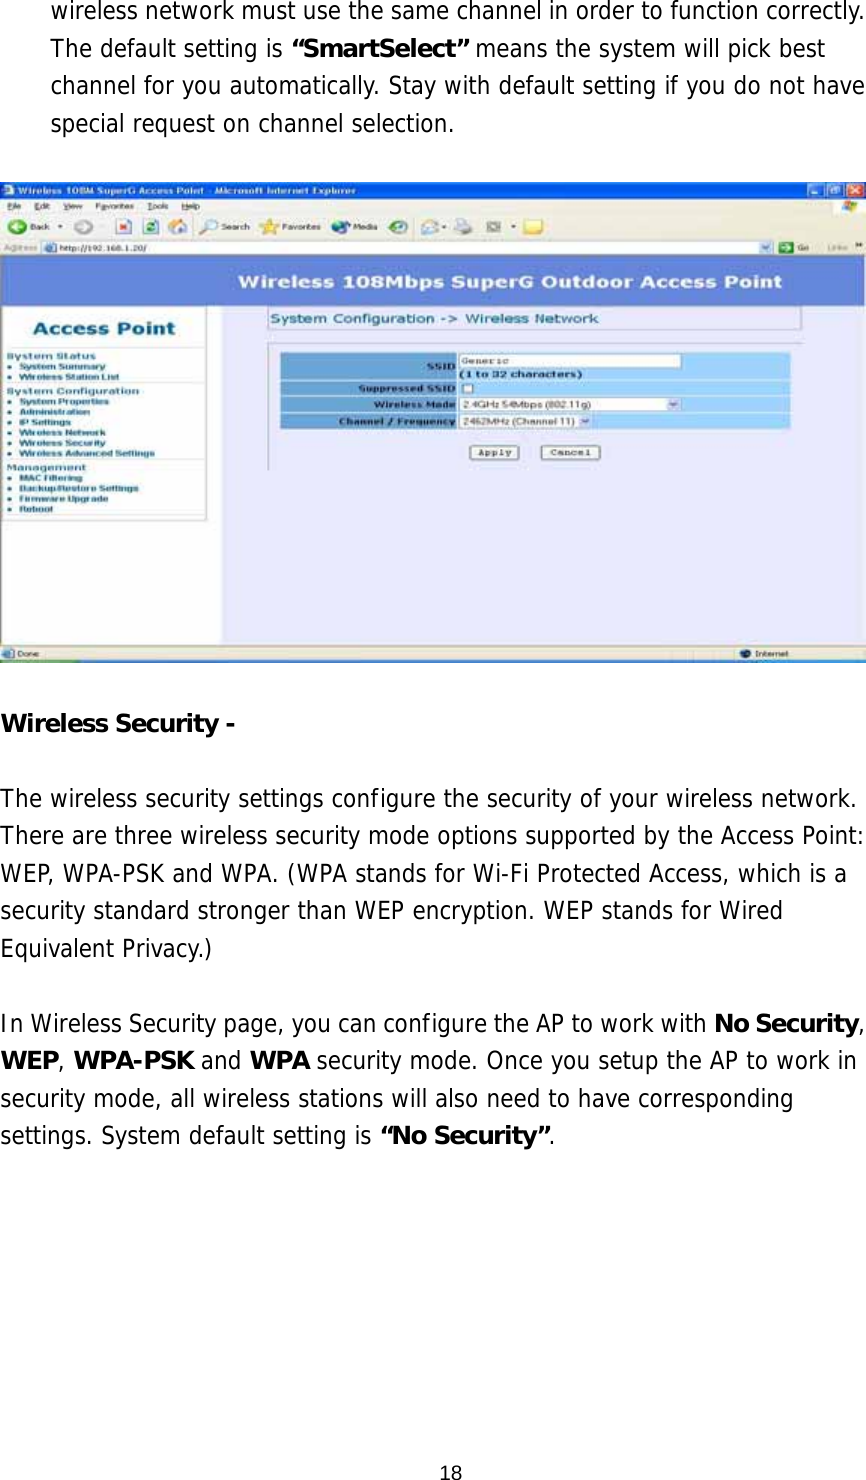  18wireless network must use the same channel in order to function correctly. The default setting is “SmartSelect” means the system will pick best channel for you automatically. Stay with default setting if you do not have special request on channel selection.    Wireless Security -    The wireless security settings configure the security of your wireless network. There are three wireless security mode options supported by the Access Point: WEP, WPA-PSK and WPA. (WPA stands for Wi-Fi Protected Access, which is a security standard stronger than WEP encryption. WEP stands for Wired Equivalent Privacy.)   In Wireless Security page, you can configure the AP to work with No Security, WEP, WPA-PSK and WPA security mode. Once you setup the AP to work in security mode, all wireless stations will also need to have corresponding settings. System default setting is “No Security”.  